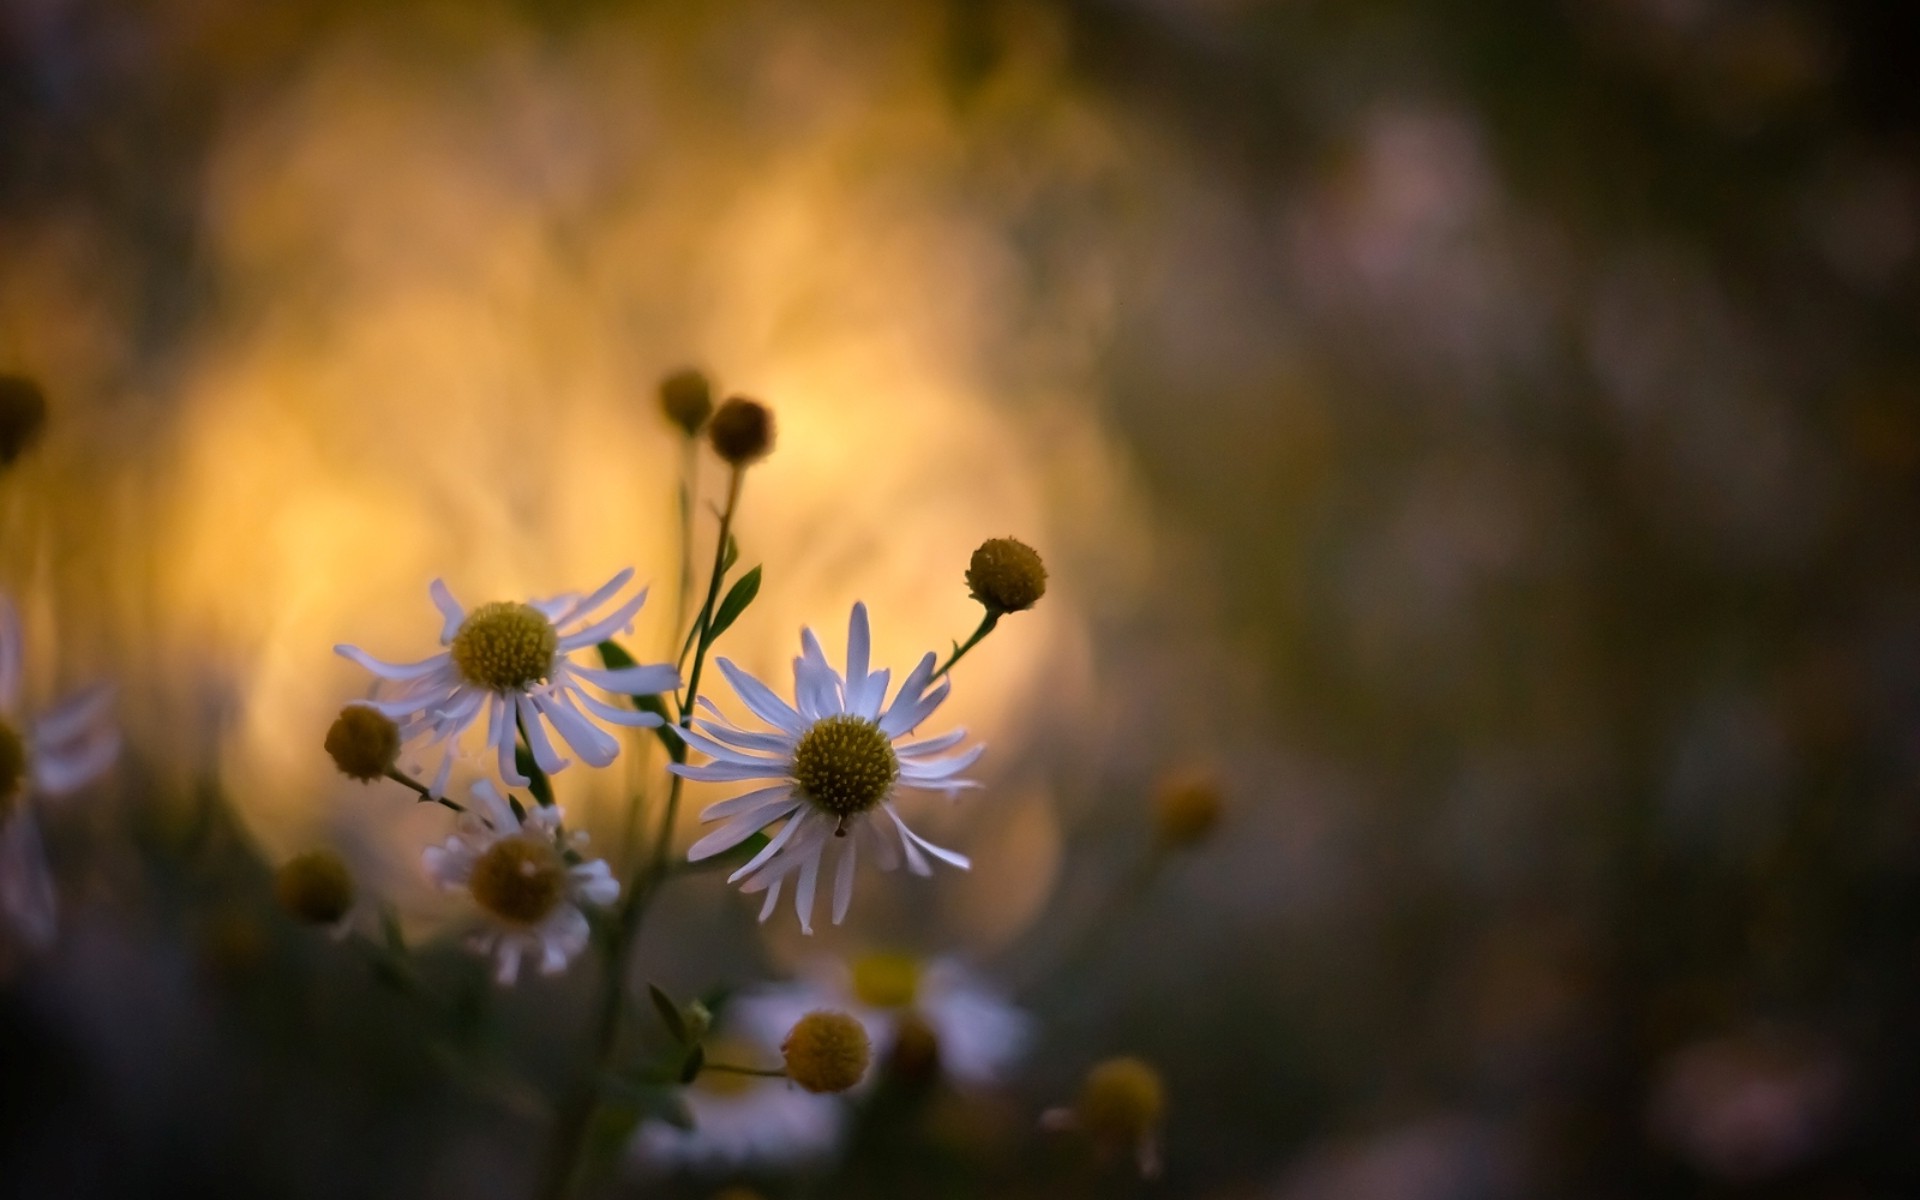 Wallpaper, sunlight, nature, branch, yellow, morning, white flowers, blossom, autumn, leaf, flower, plant, flora, petal, wildflower, 1920x1200 px, computer wallpaper, botany, close up, macro photography, daisy family 1920x1200